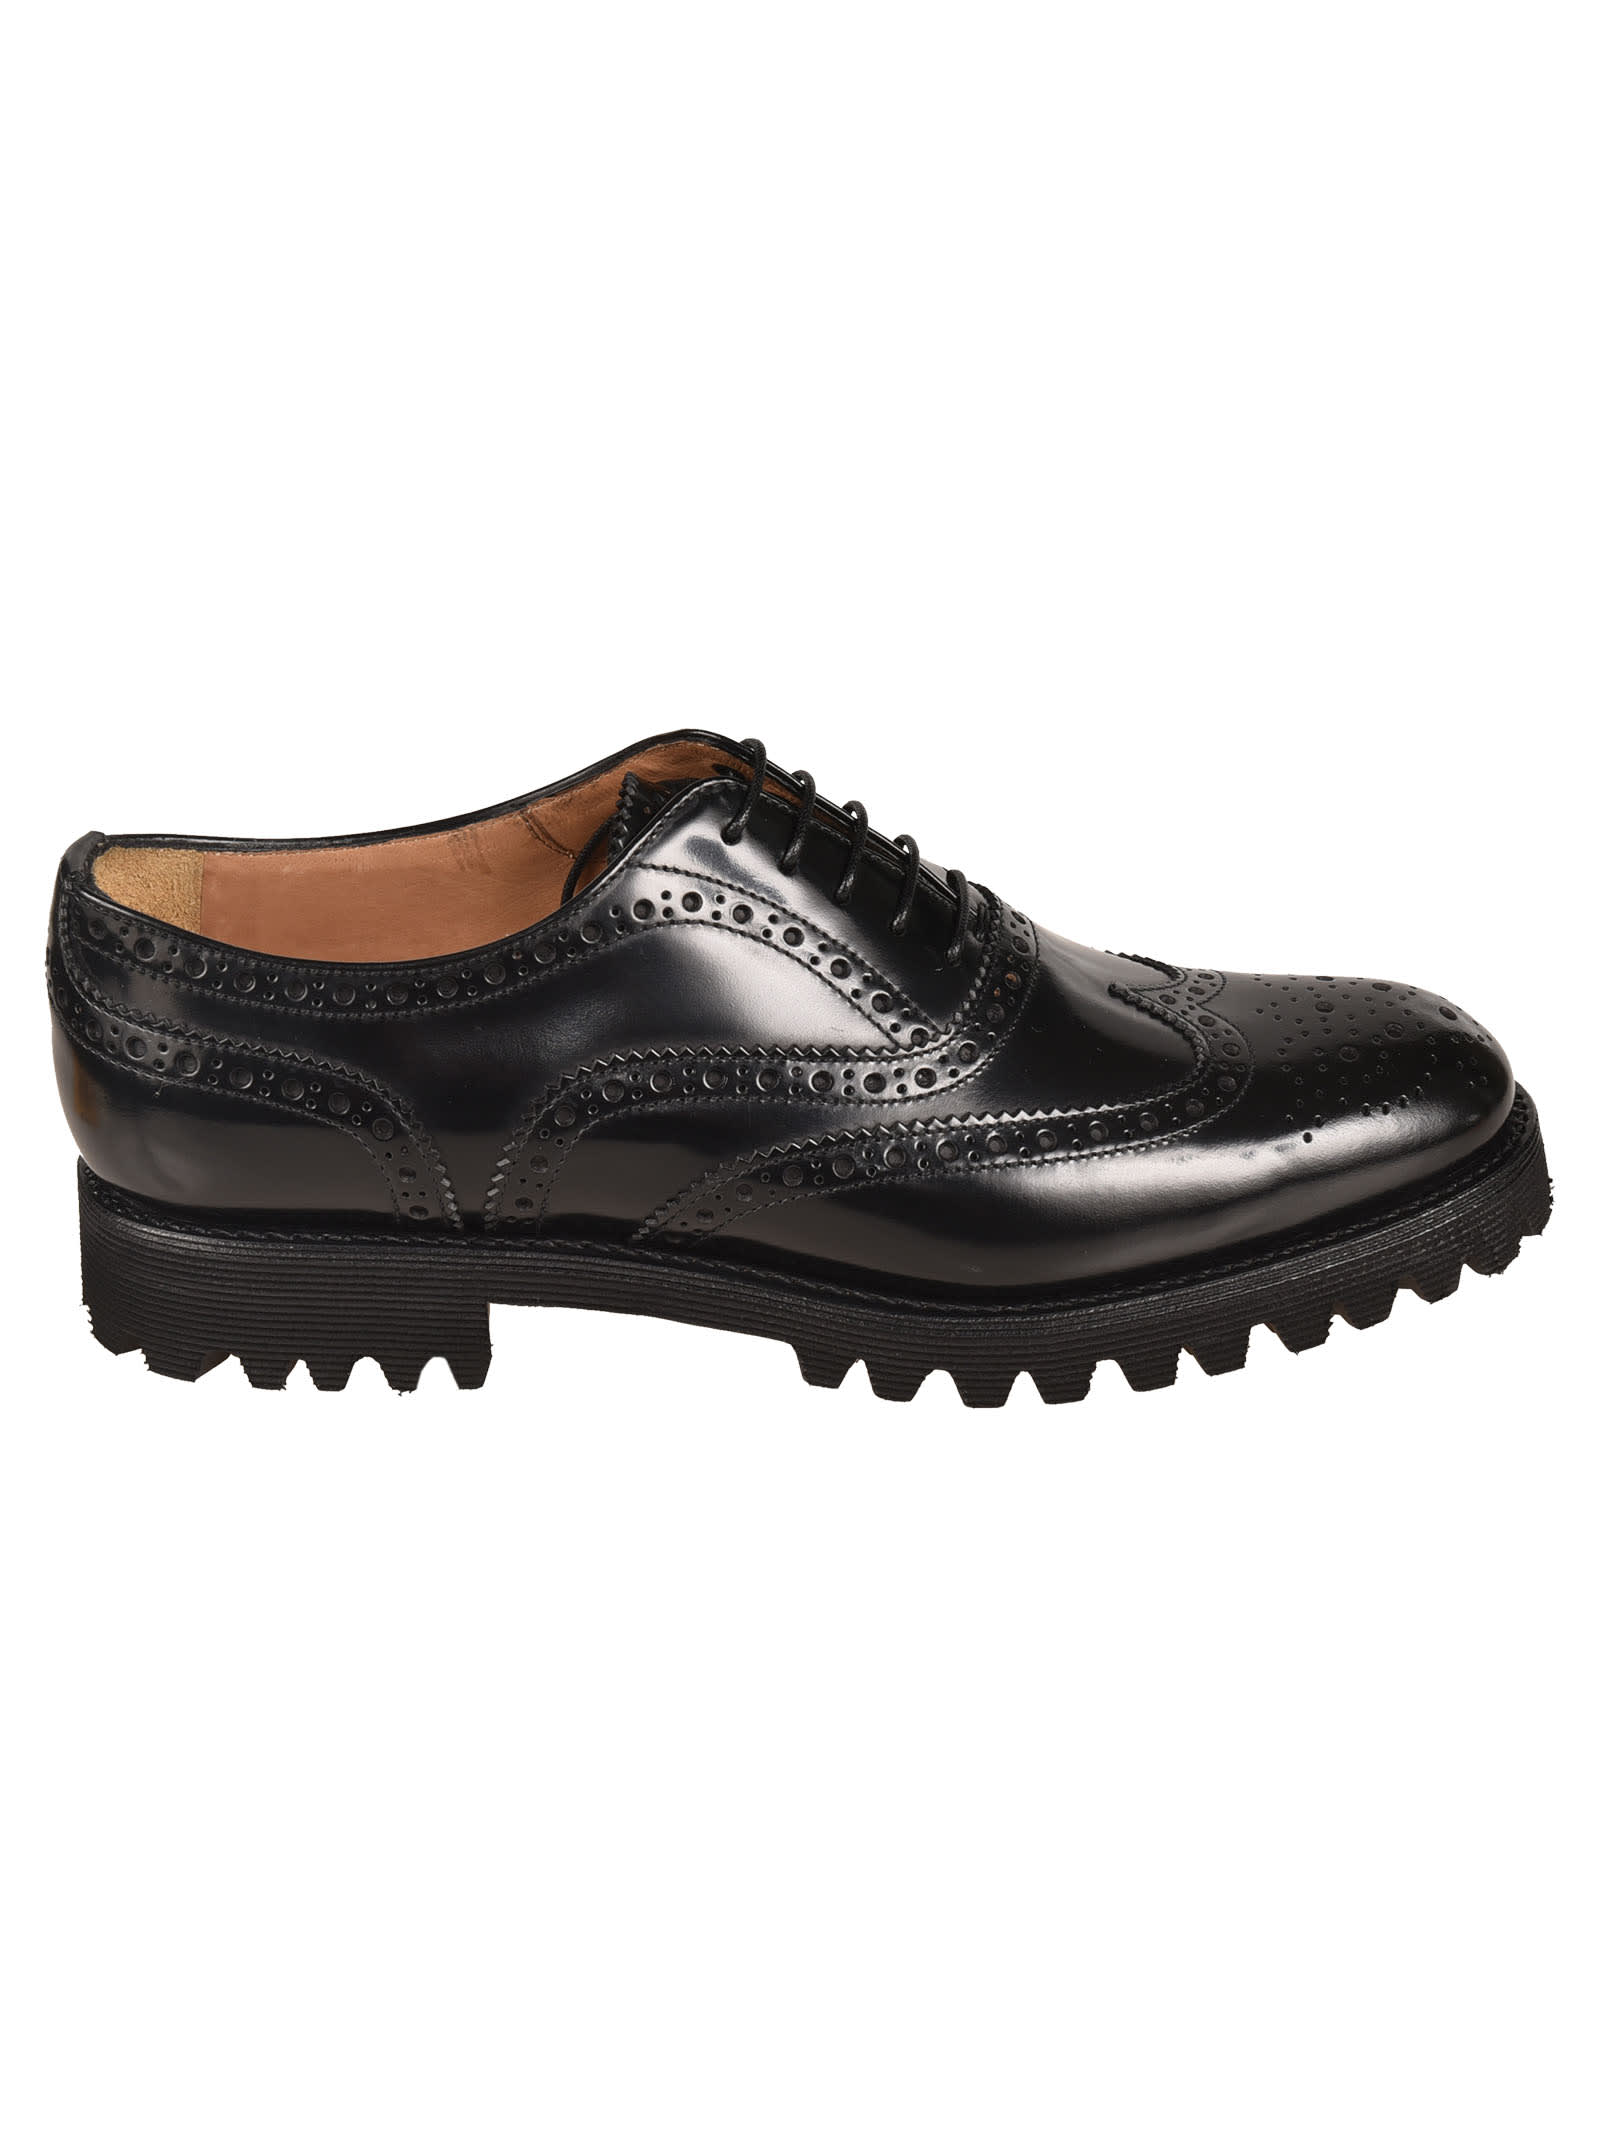 CHURCH'S PERFORATED OXFORD SHOES